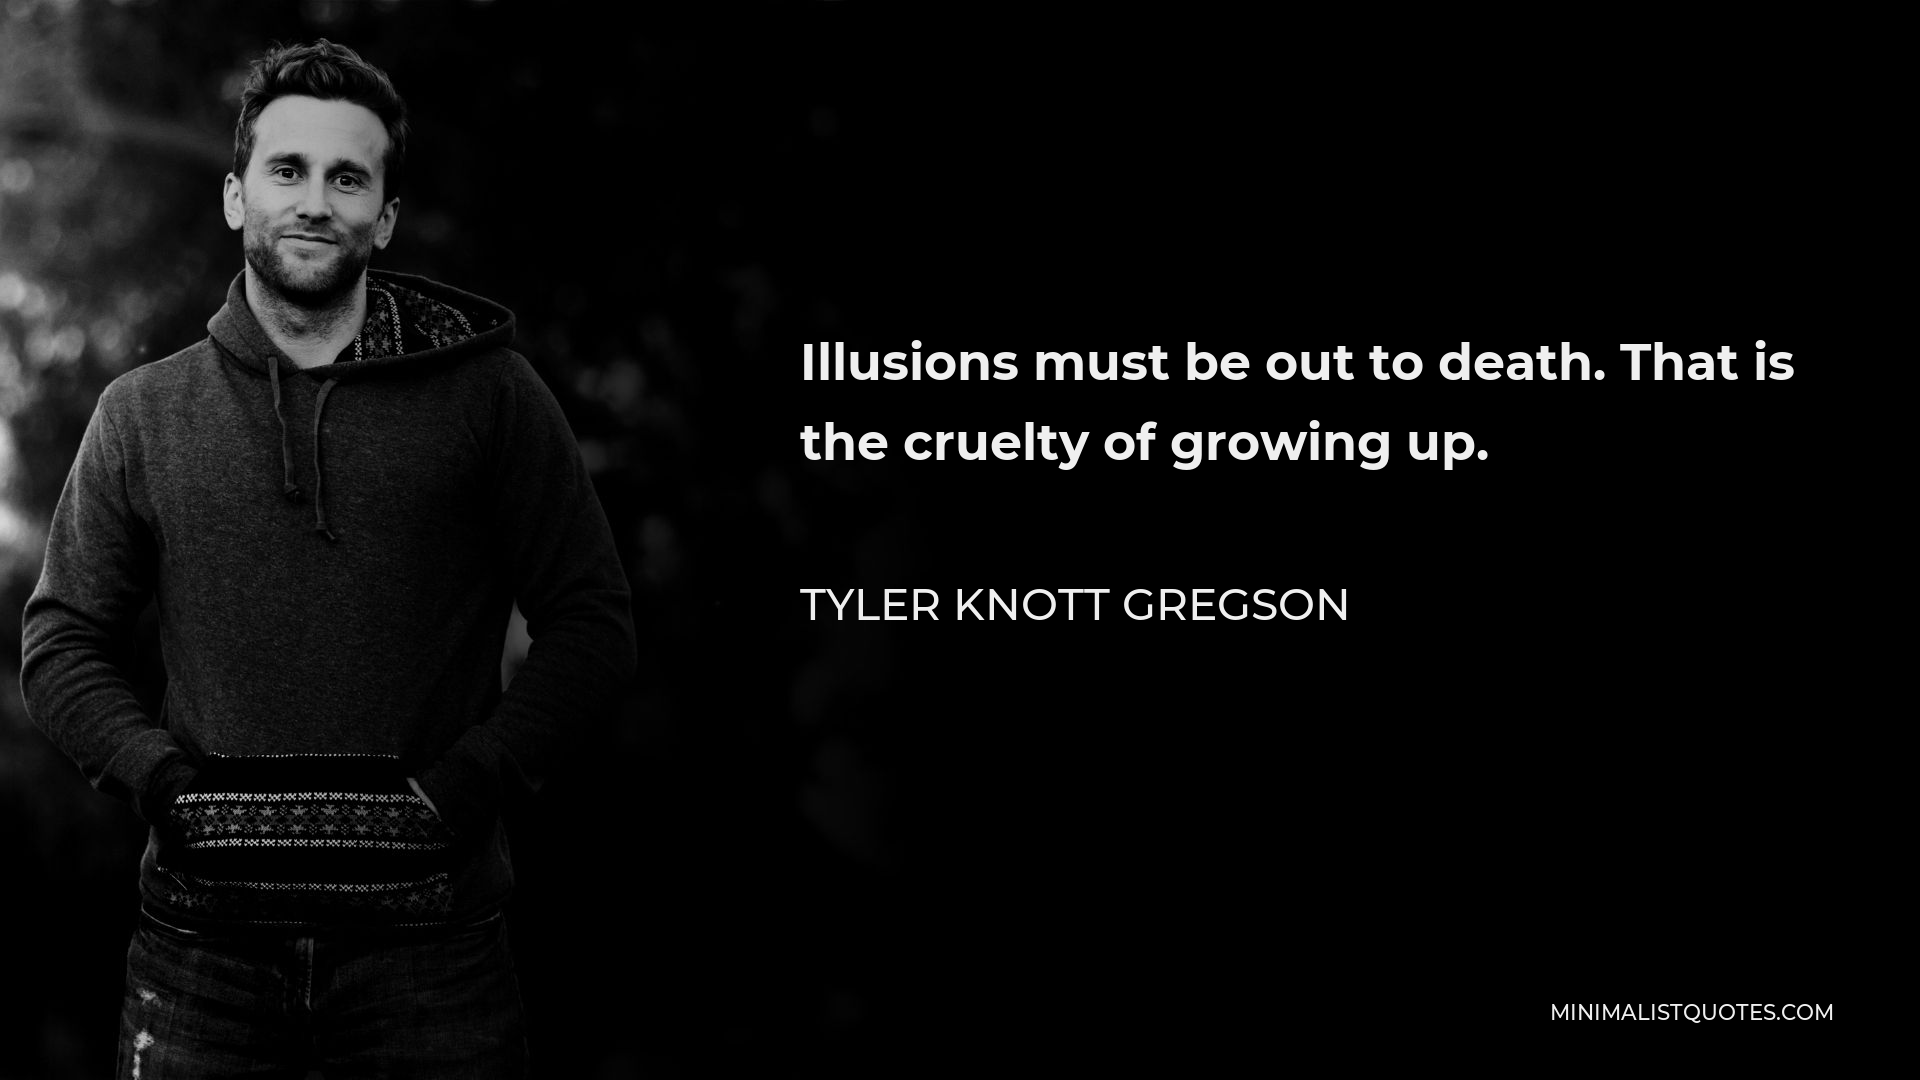 Tyler Knott Gregson Quote - Illusions must be out to death. That is the cruelty of growing up.